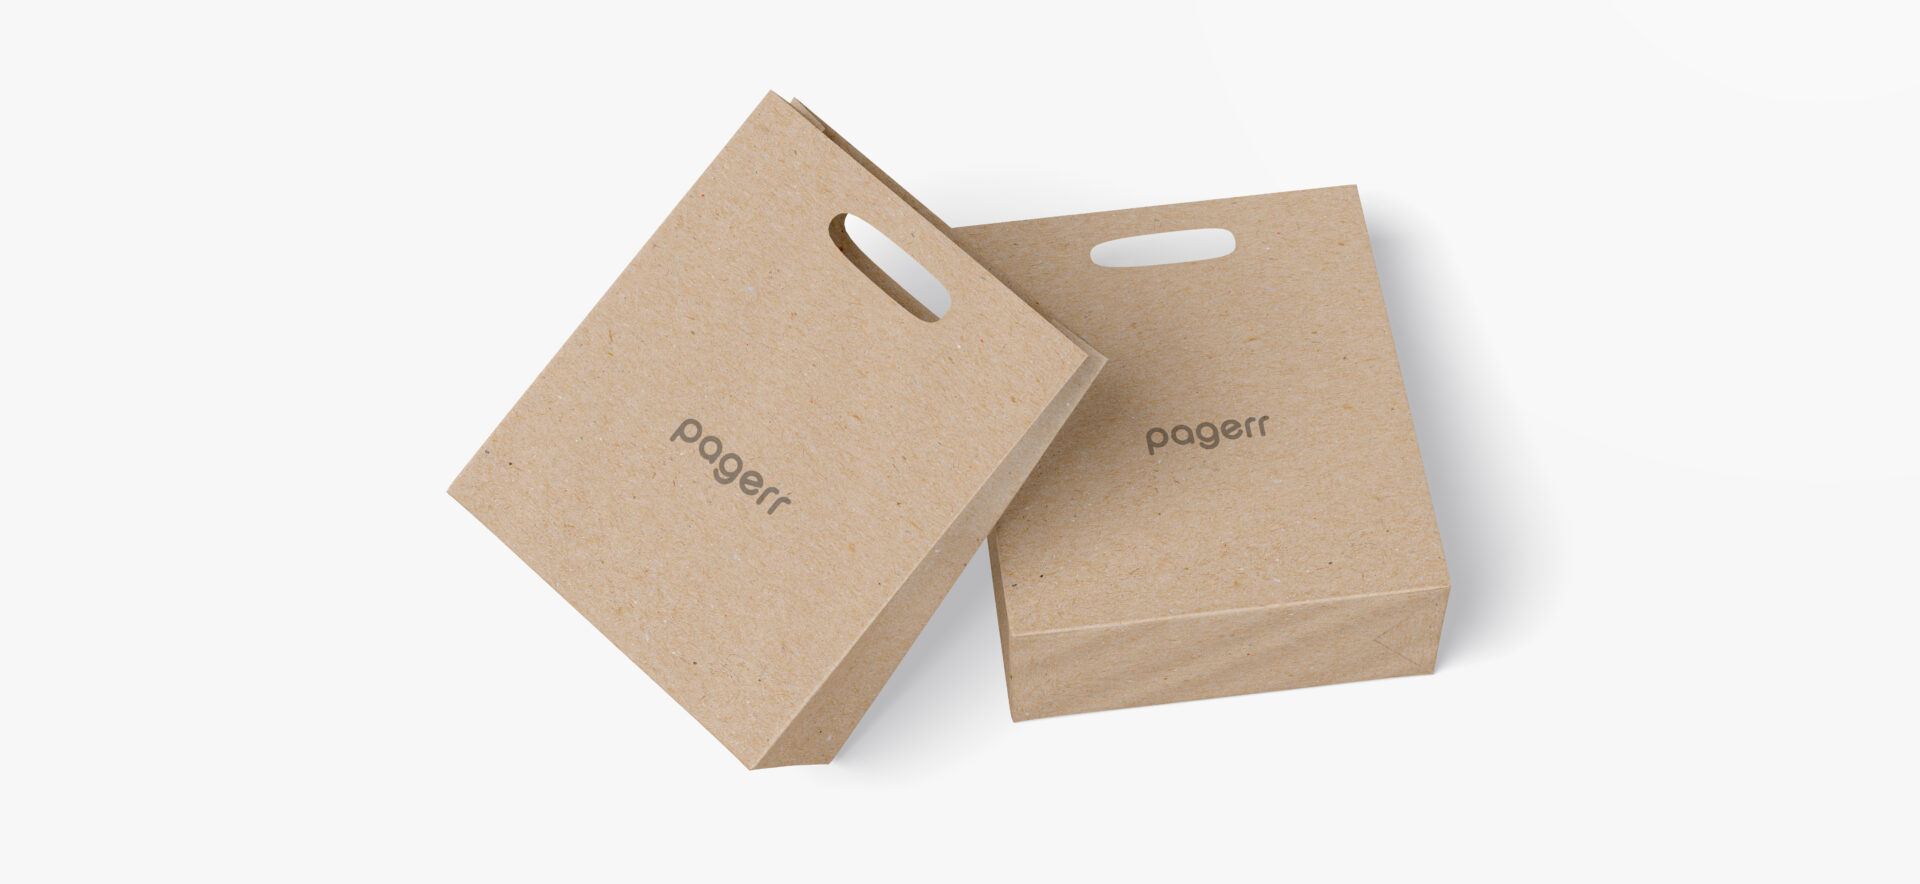 Takeaway bags in Vilnius - Print with Pagerr